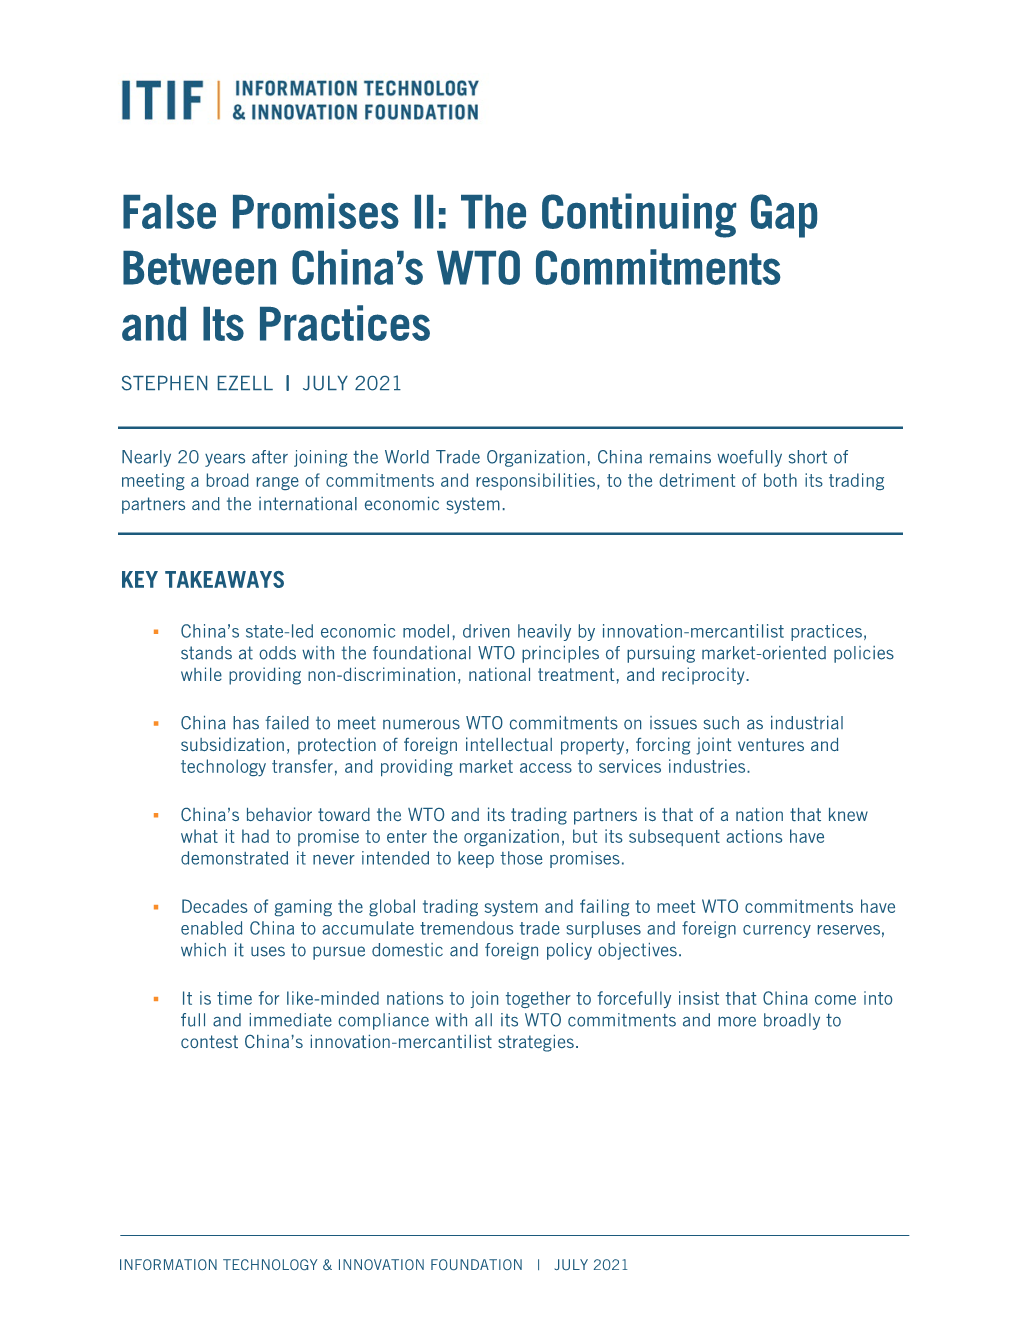 False Promises II: the Continuing Gap Between China’S WTO Commitments and Its Practices